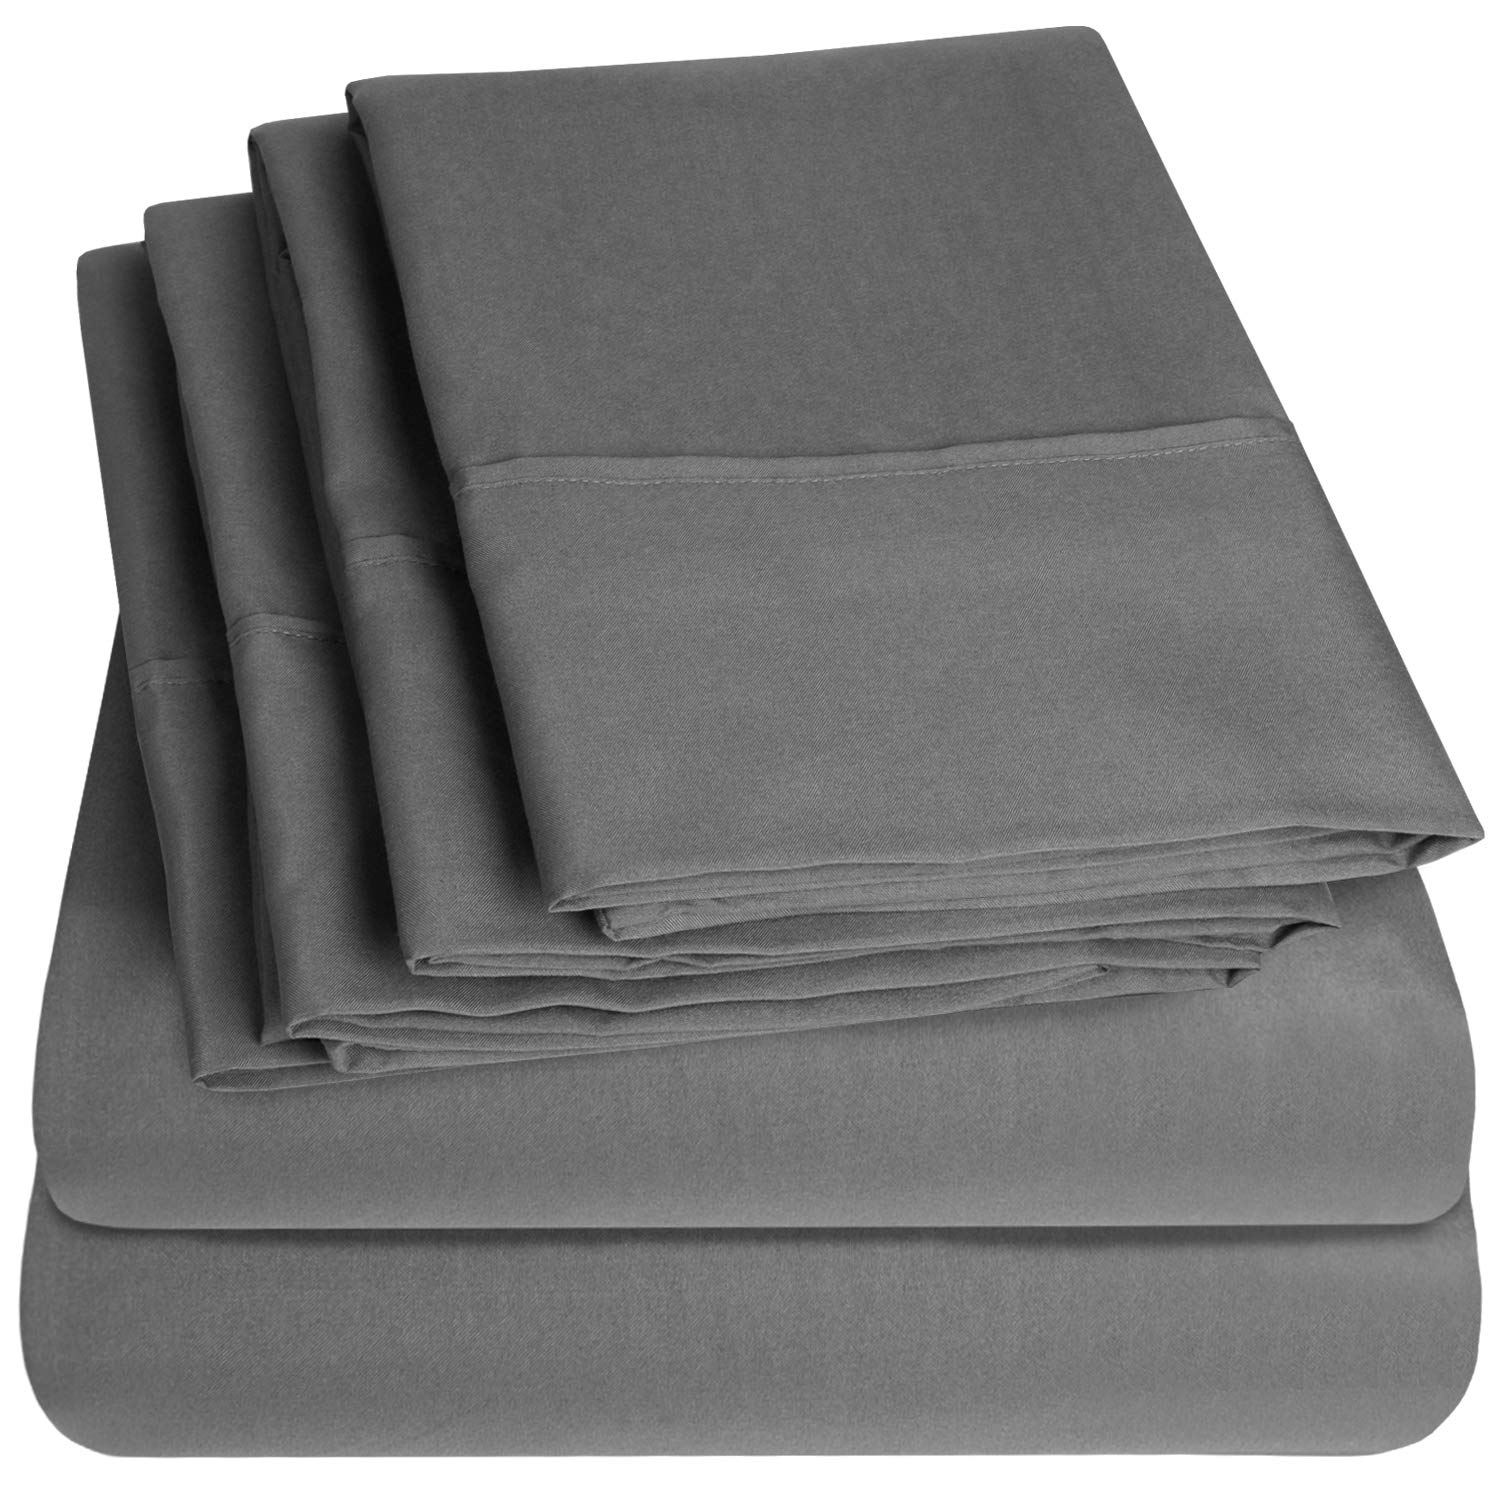 Book Cover Bed Sheets Queen Size Grey - 6 Piece 1500 Supreme Collection Fine Brushed Microfiber Deep Pocket Queen Sheet Set Bedding - 2 EXTRA PILLOW CASES, GREAT VALUE - Queen, Gray Gray Queen